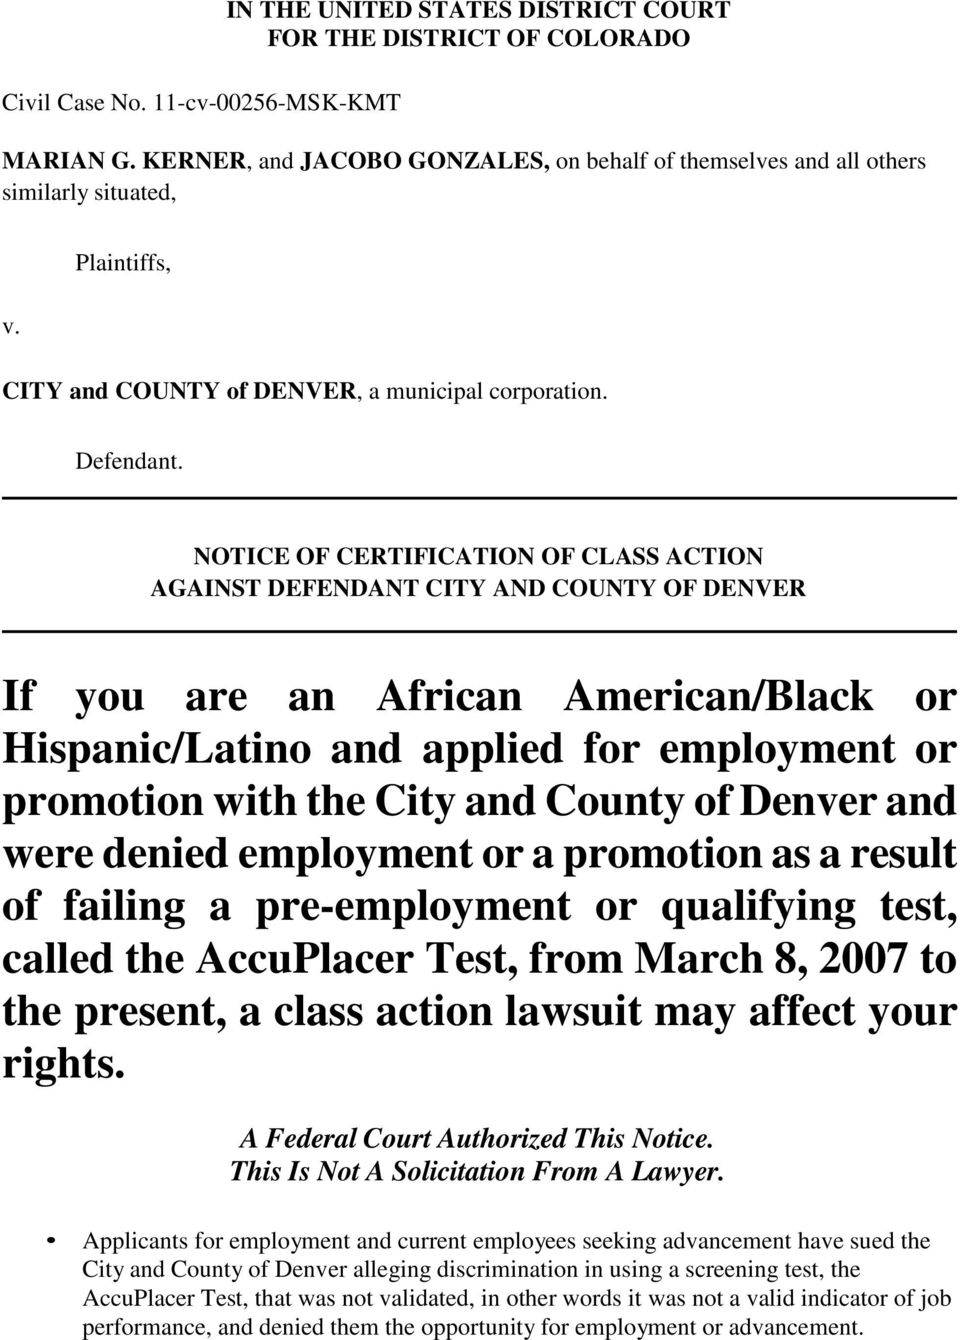 NOTICE OF CERTIFICATION OF CLASS ACTION AGAINST DEFENDANT CITY AND COUNTY OF DENVER If you are an African American/Black or Hispanic/Latino and applied for employment or promotion with the City and